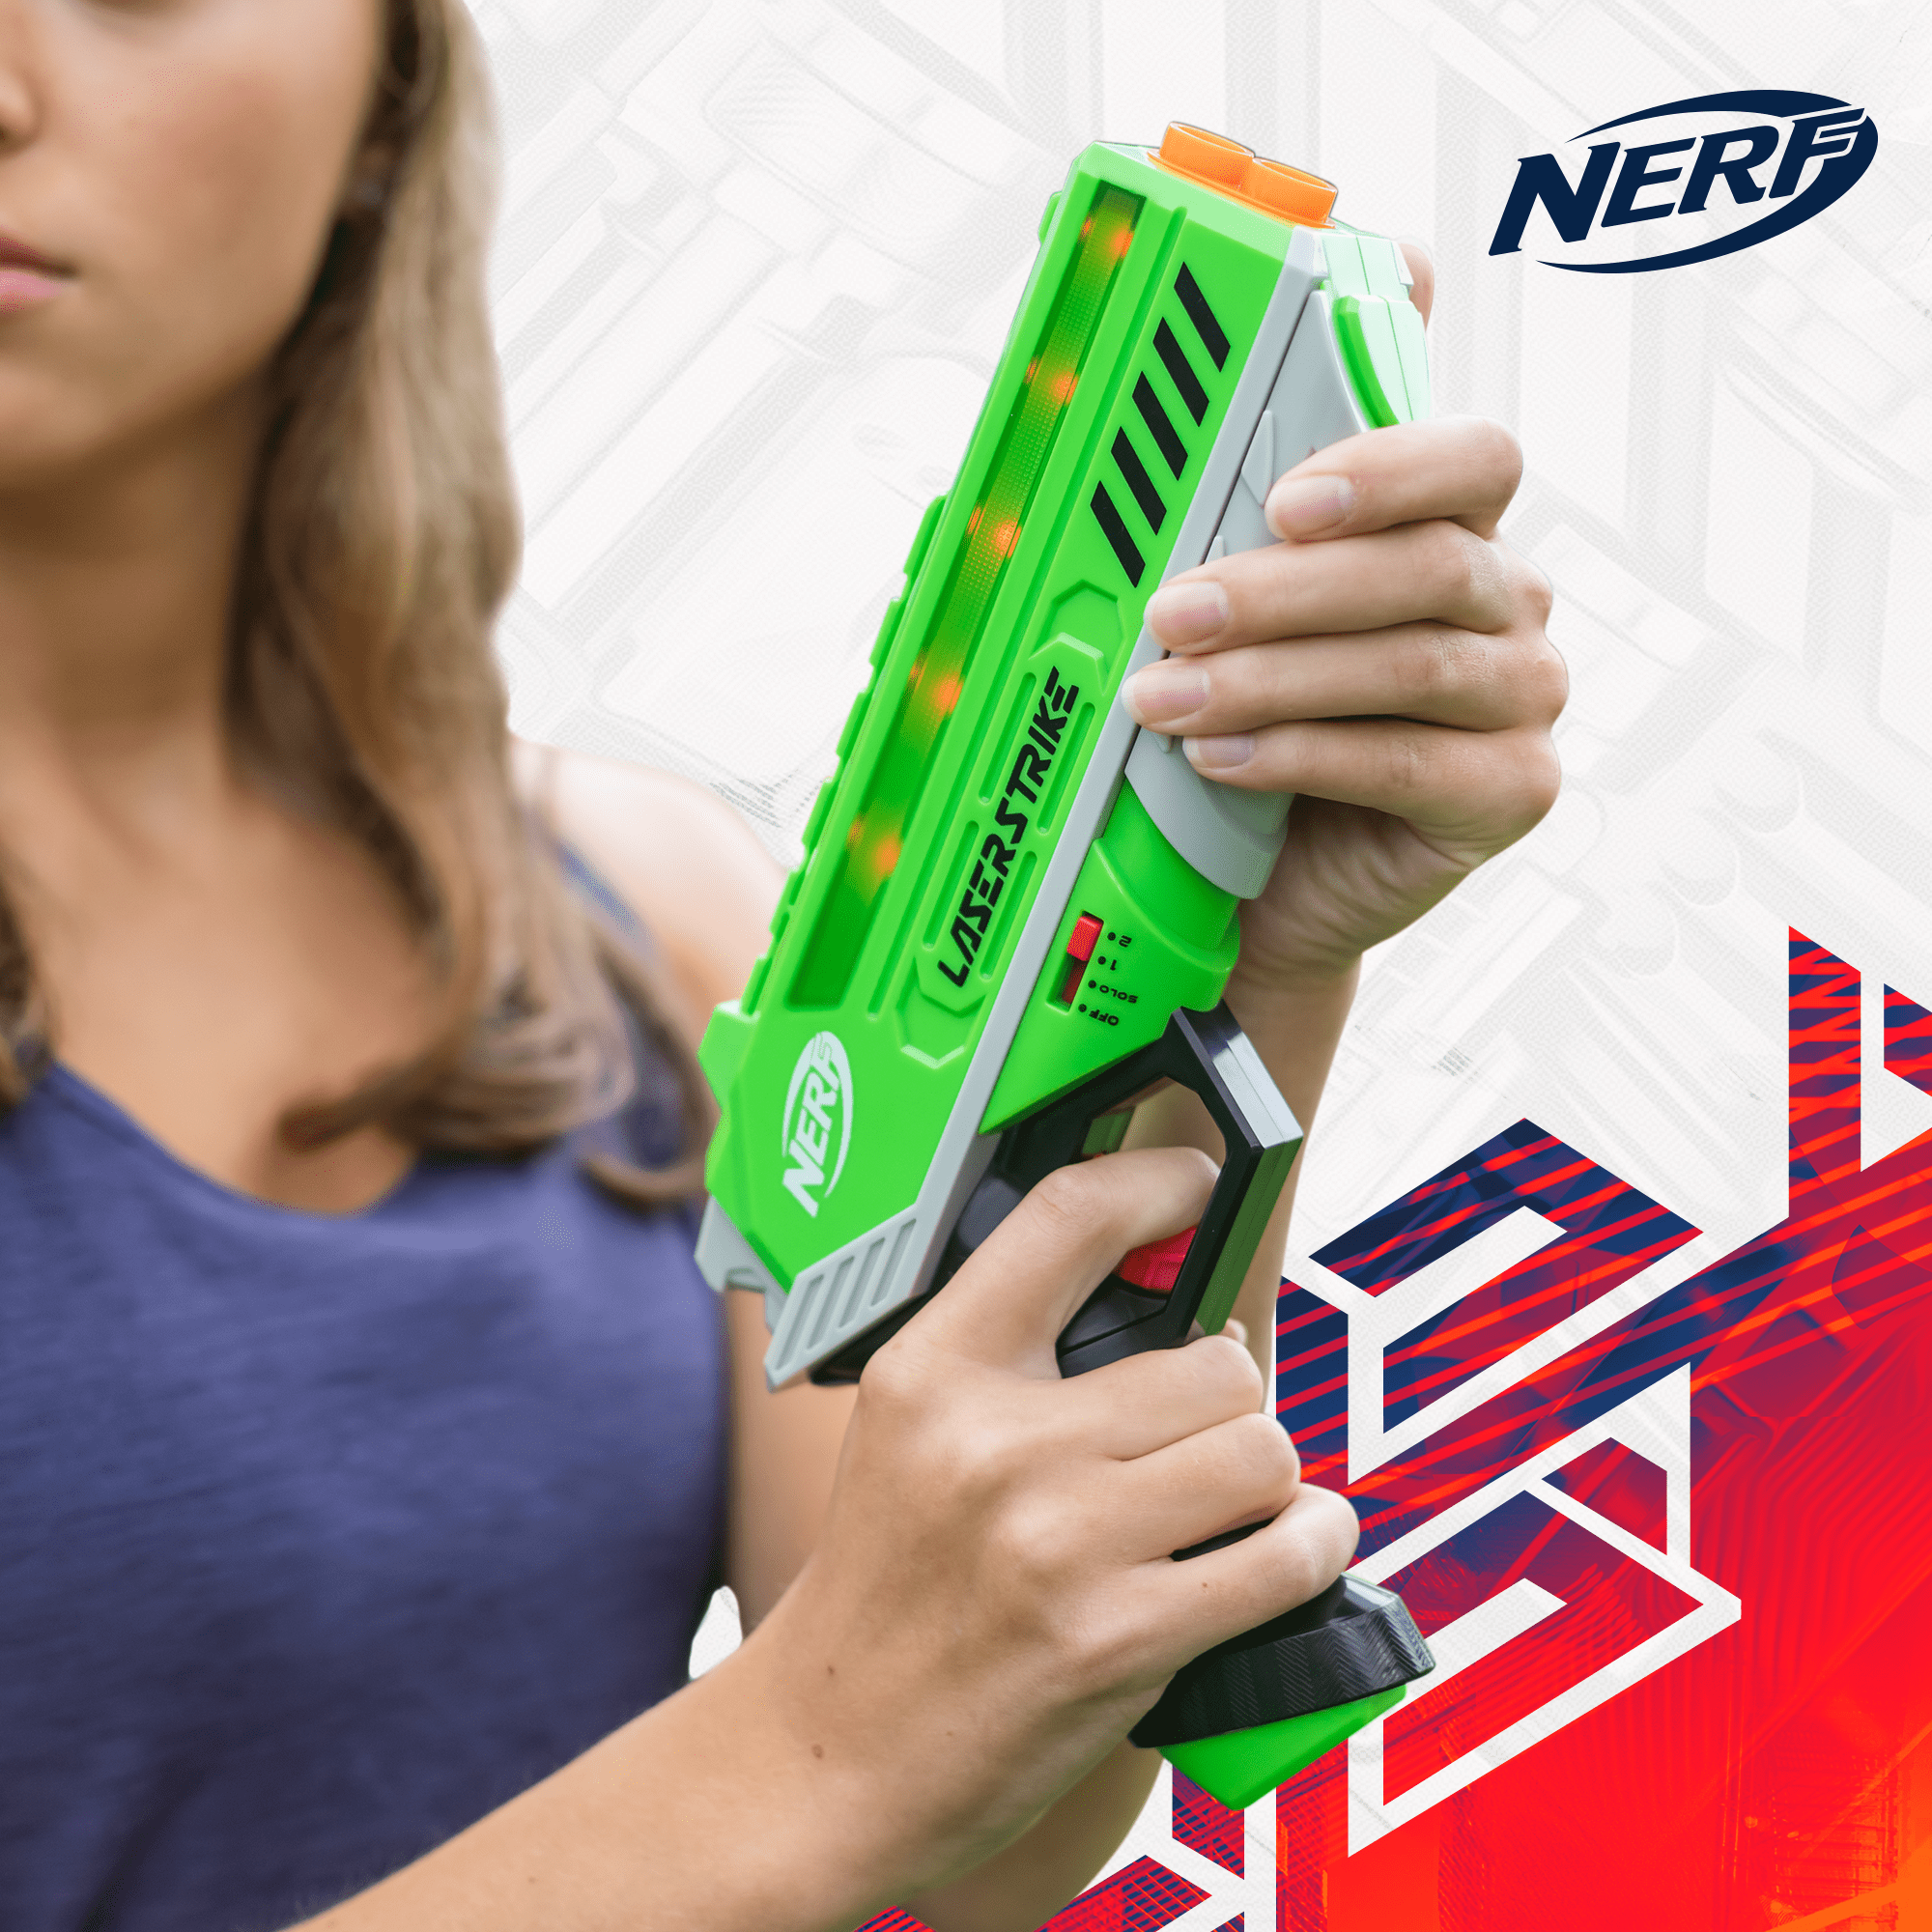 Nerf just brought back laser tag -- again -- with Laser Ops Pro - CNET